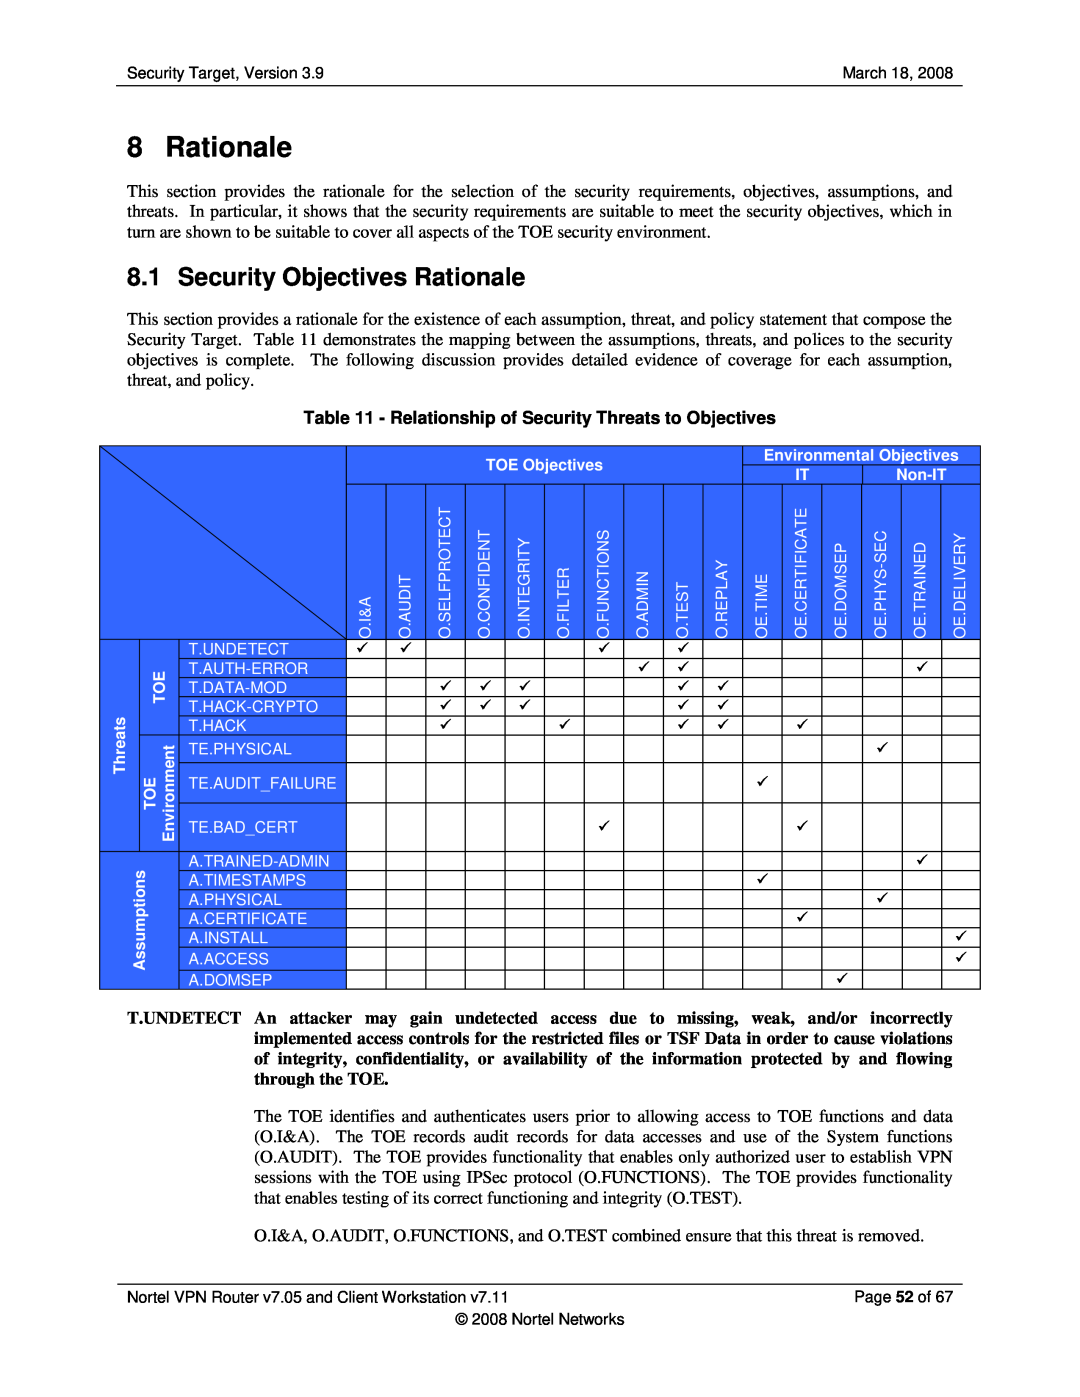 Nortel Networks 7.05, 7.11 manual Security Objectives Rationale, Relationship of Security Threats to Objectives 